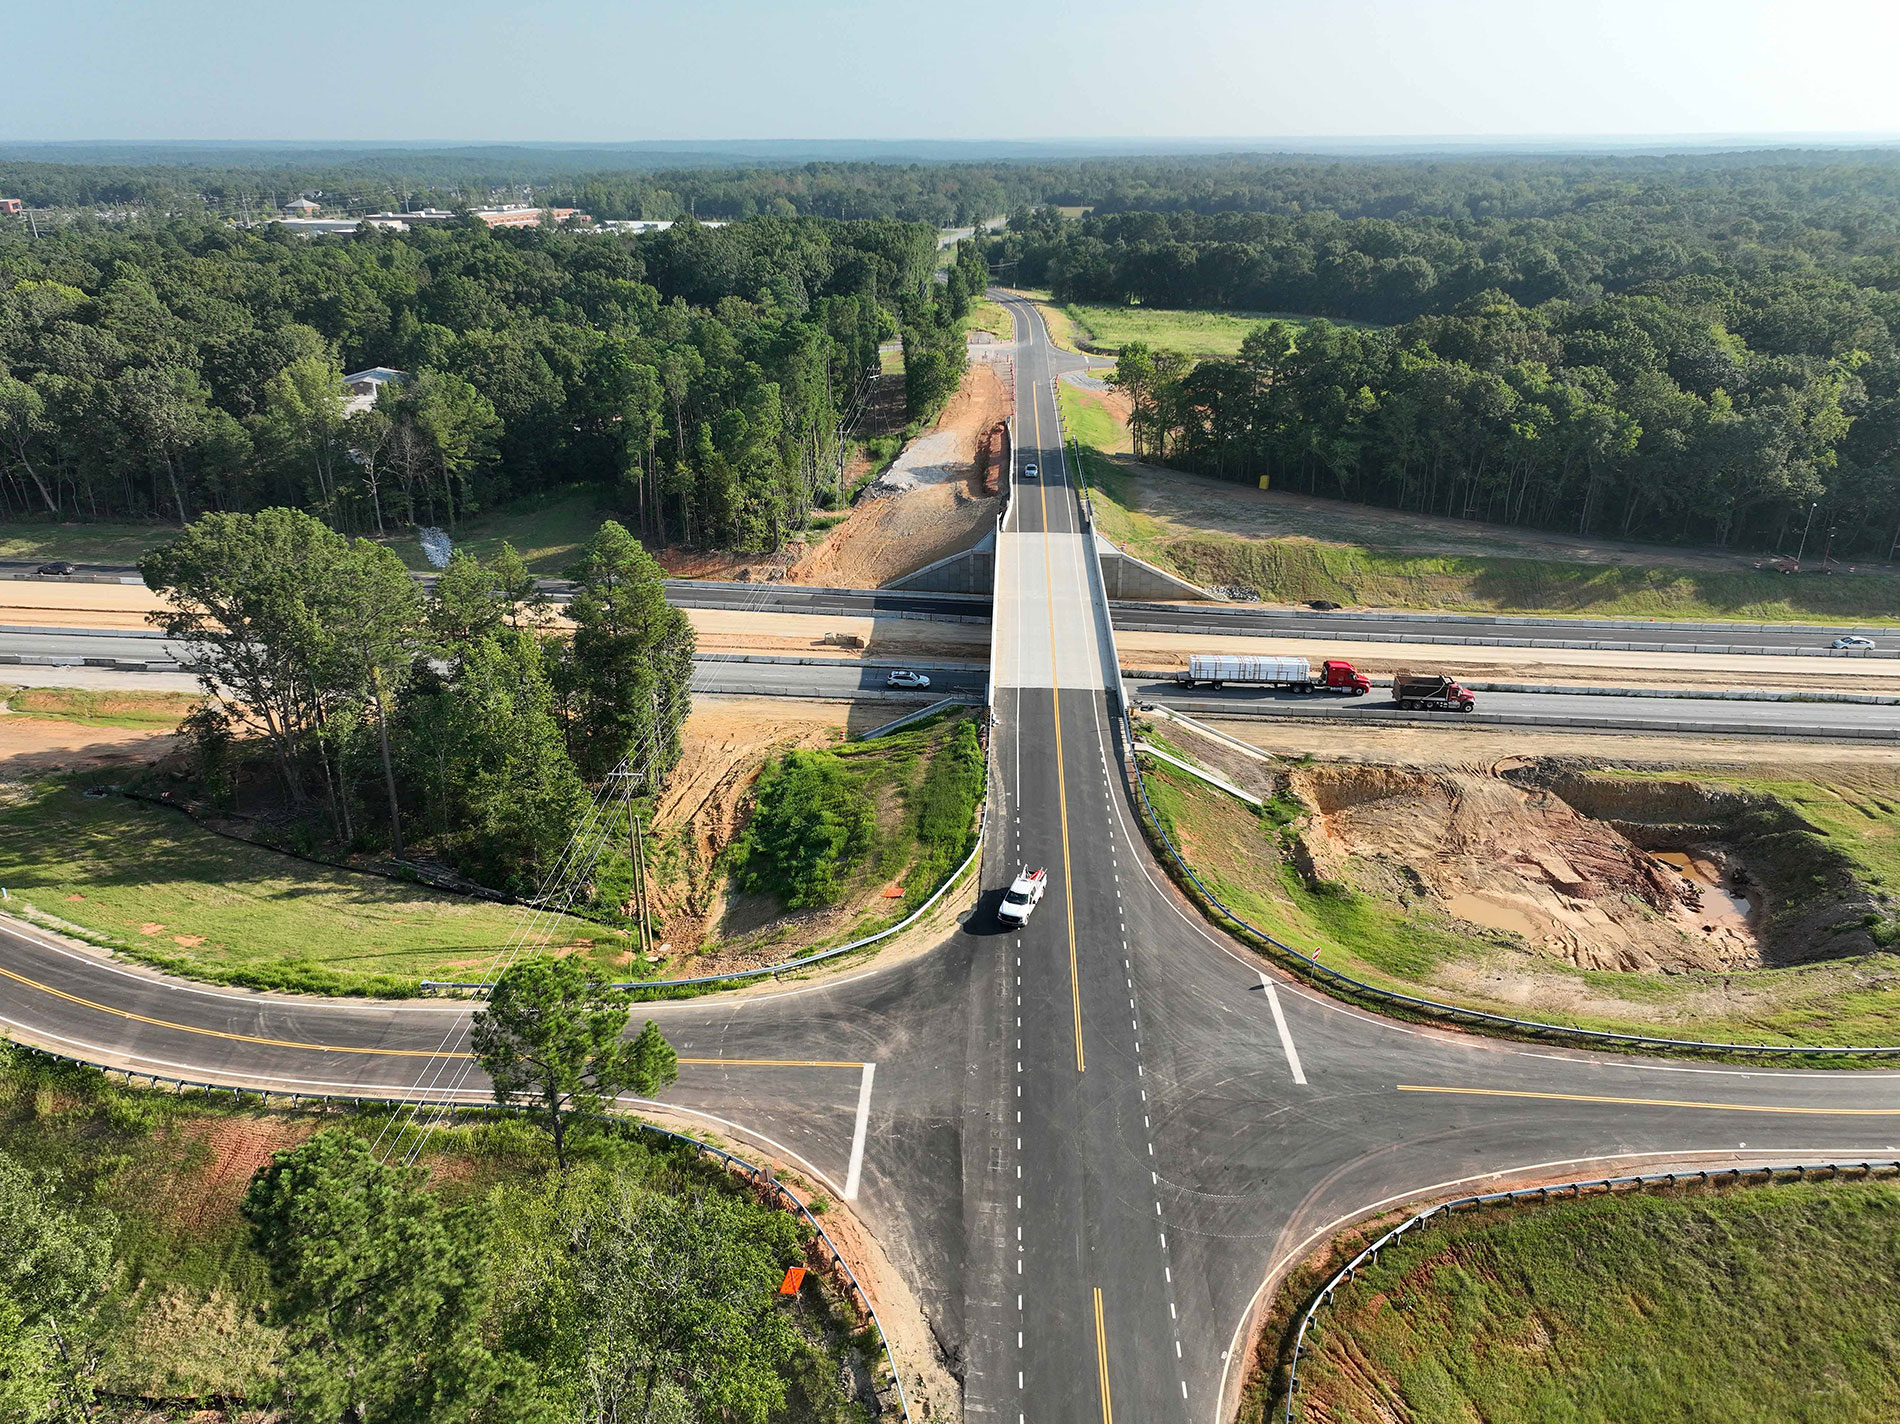 Work has been completed at the overpass bridge on Mount Vernon Road.  This view shows the newly opened road and realigned side roads.